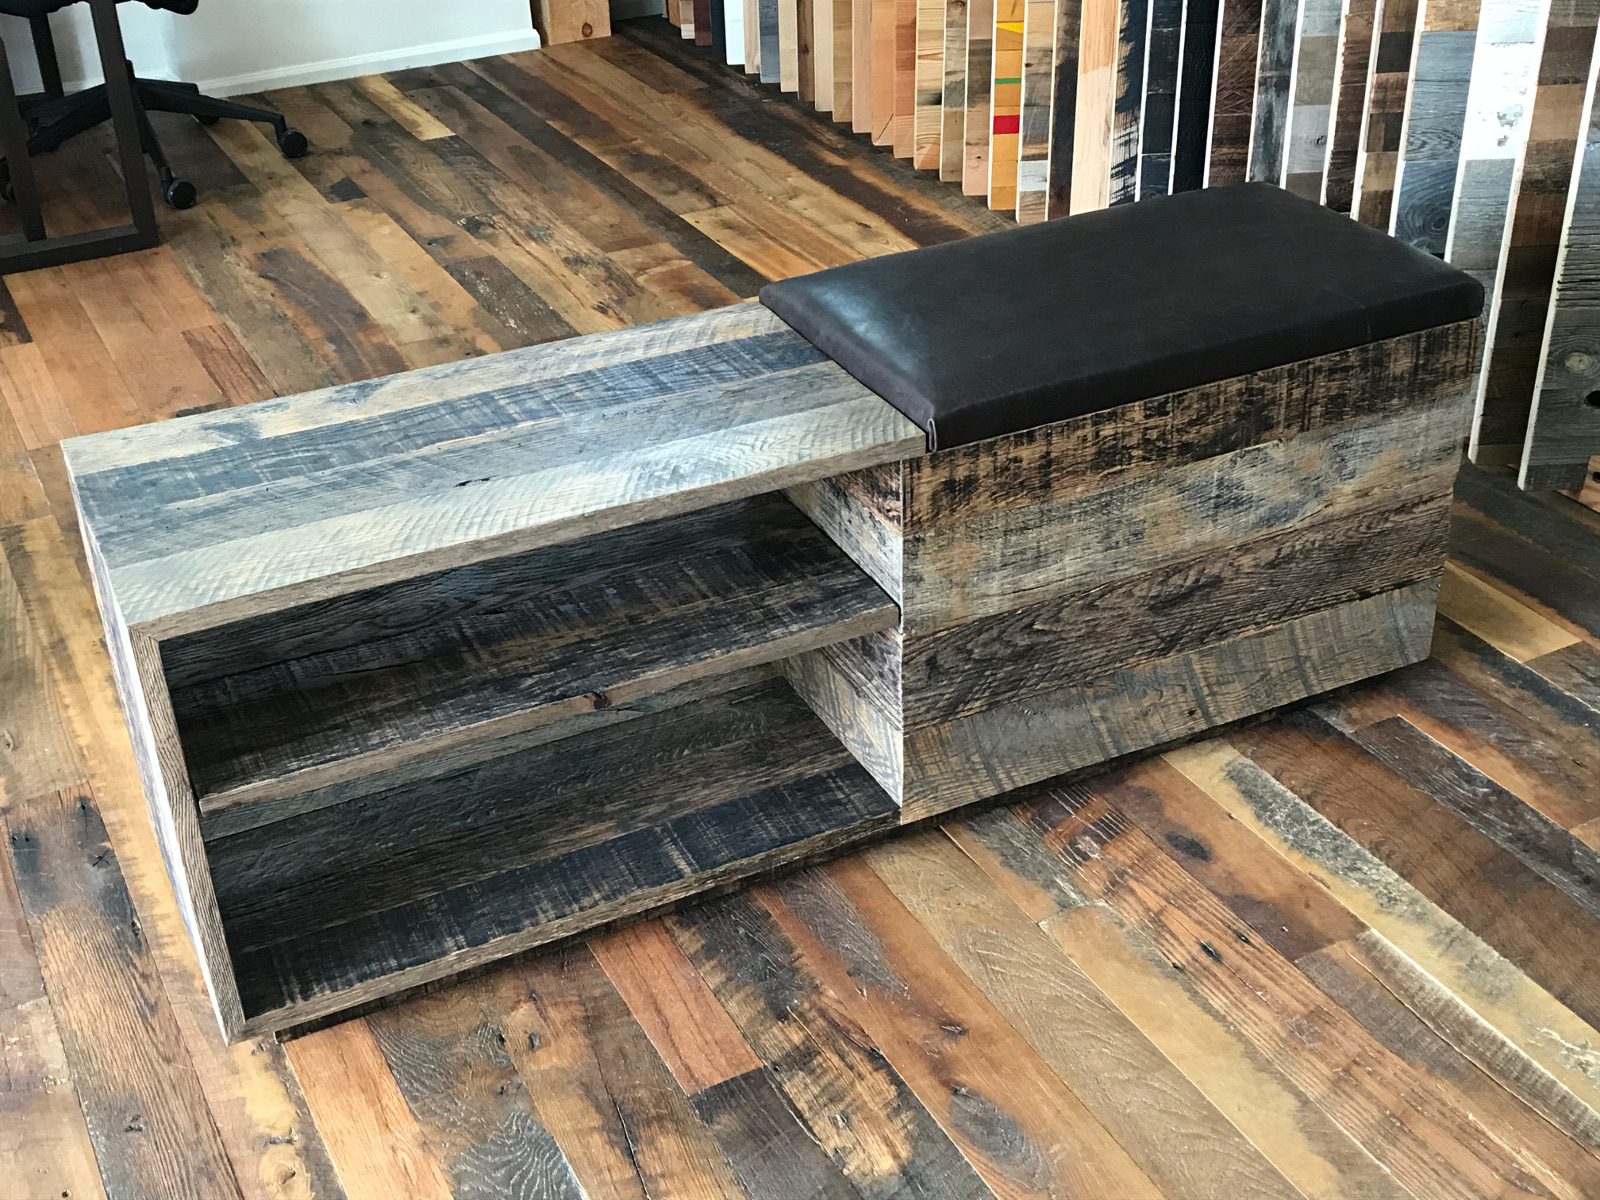 Makers Woodworks created a bench with storage for Pioneer Millworks Read:Grain DWP open house using Black & Tan Reclaimed Oak.